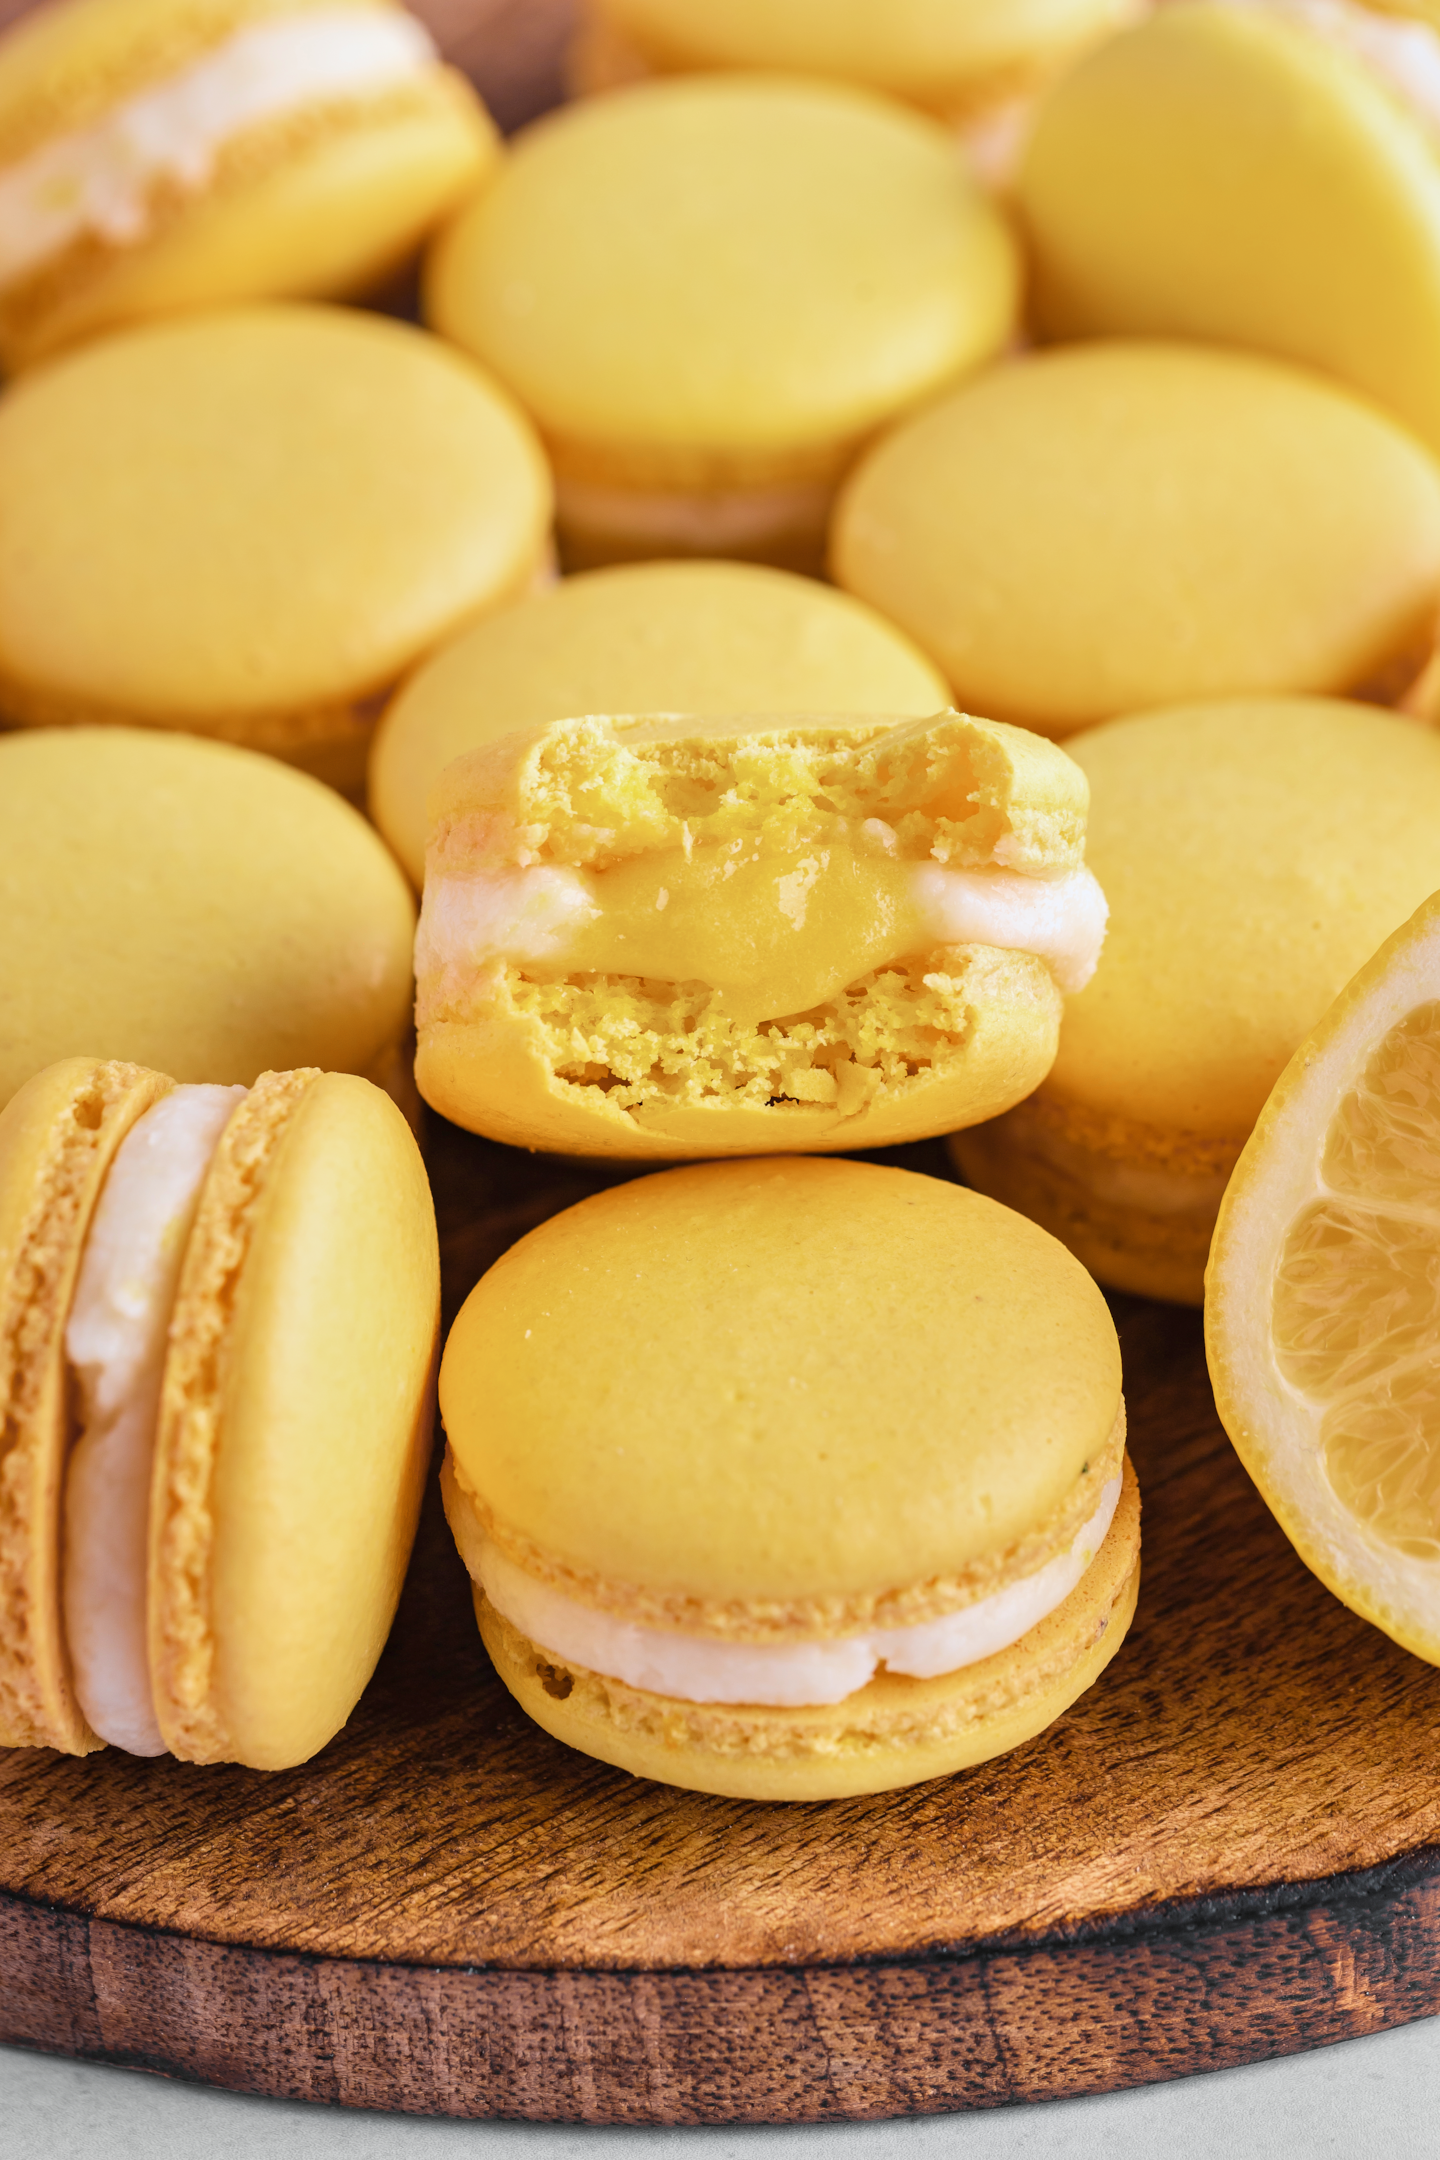 lemon macaron filled with lemon curd and a bite taken out of it